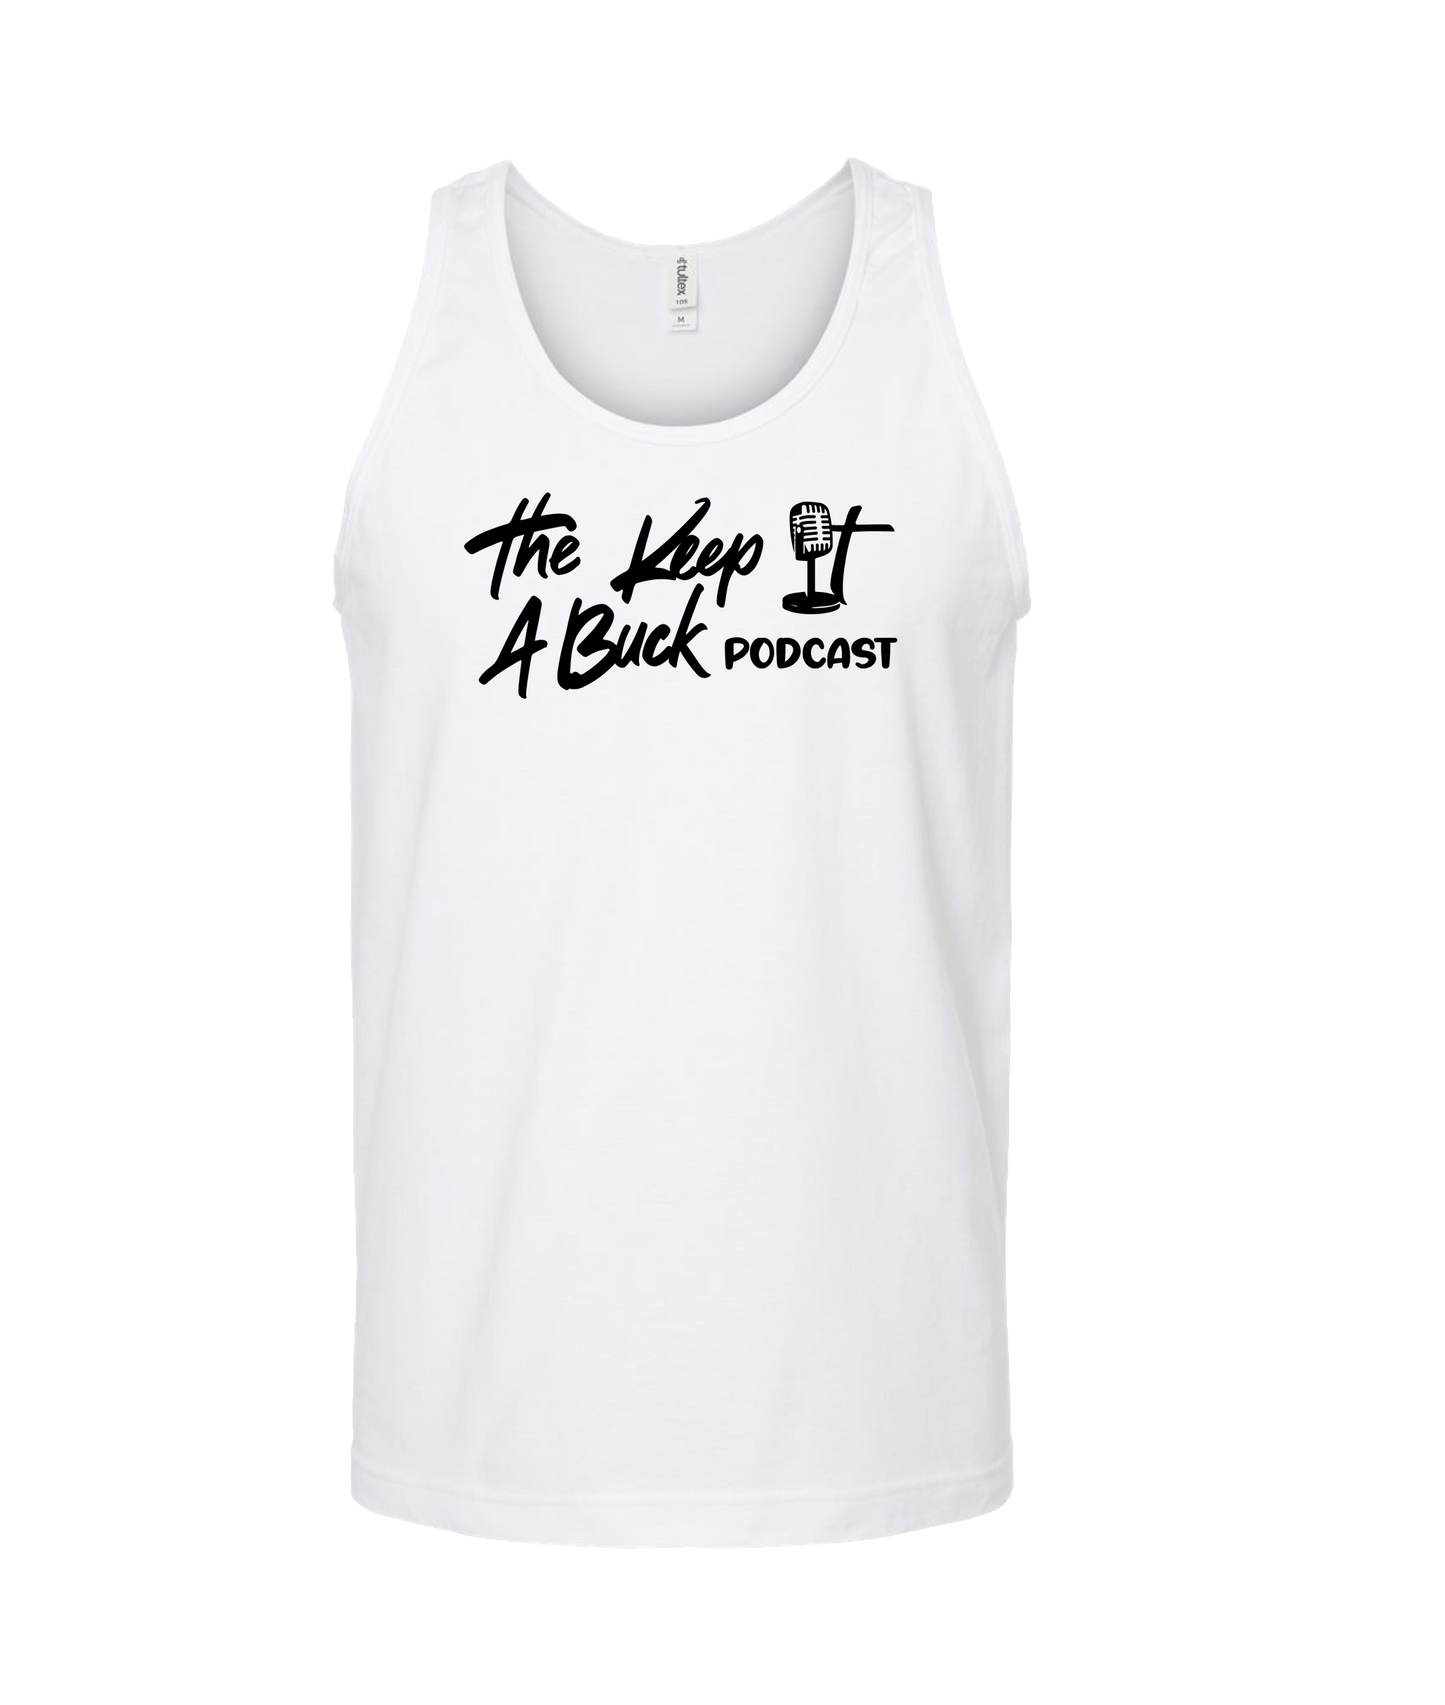 The Buck Store - The Keep it a Buck Podcast Text Logo - White Tank Top